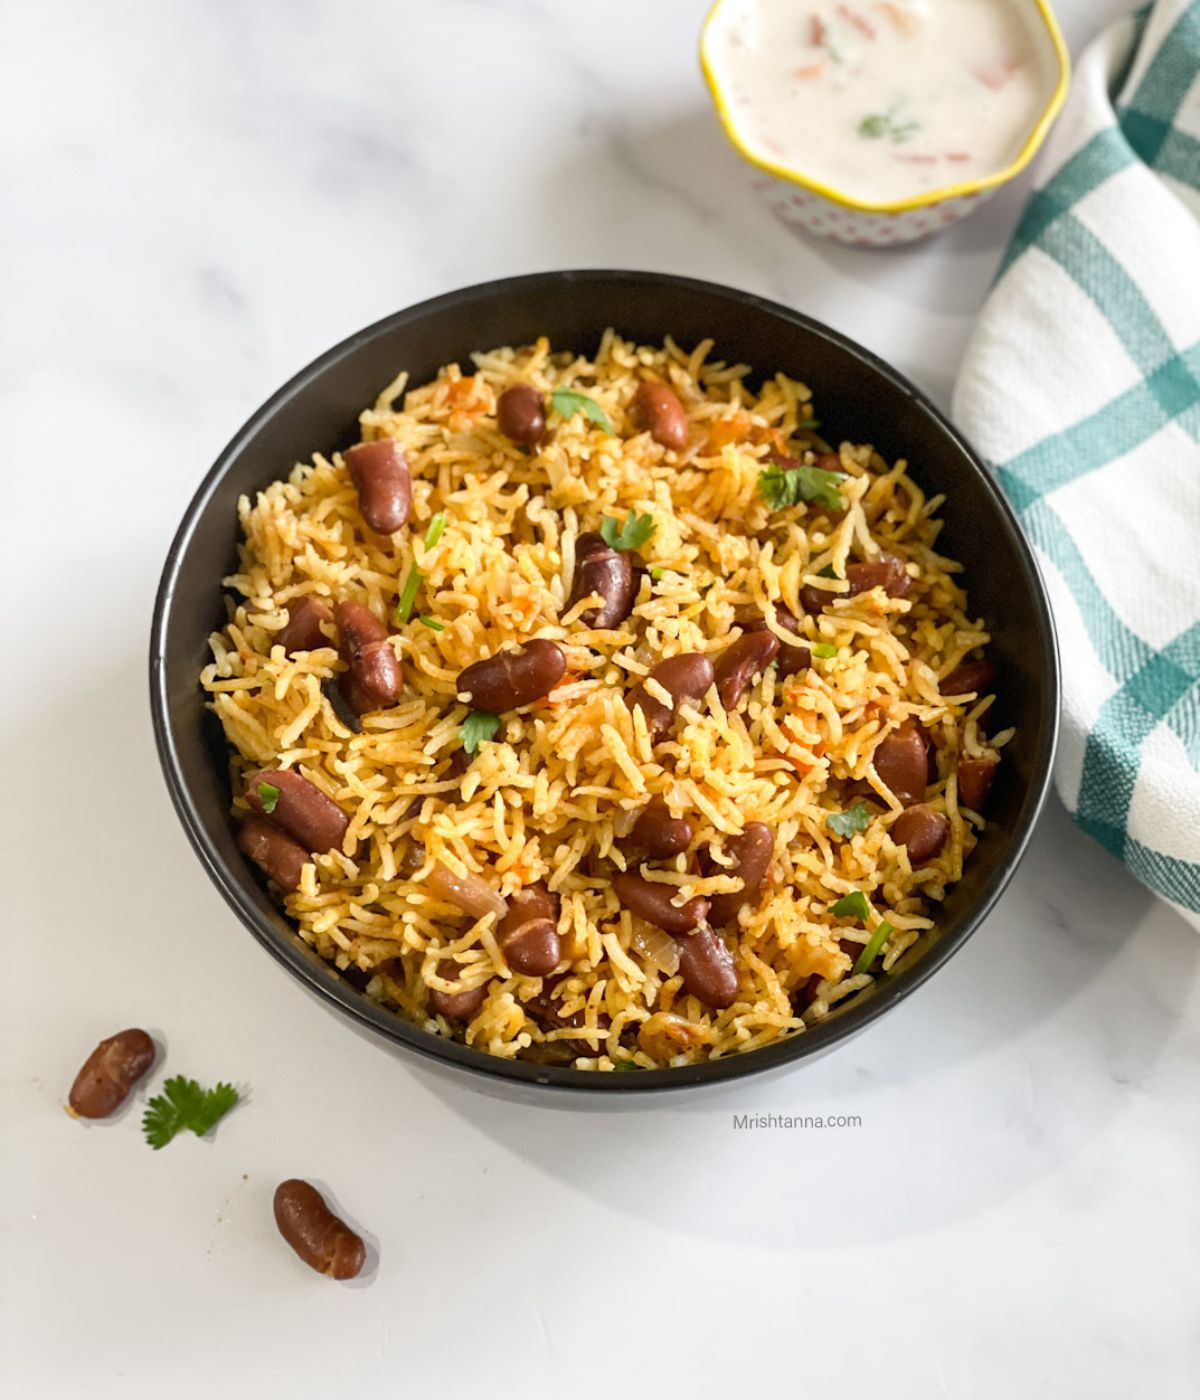 A bowl of rajma pulao is on the table with a bowl of raita.